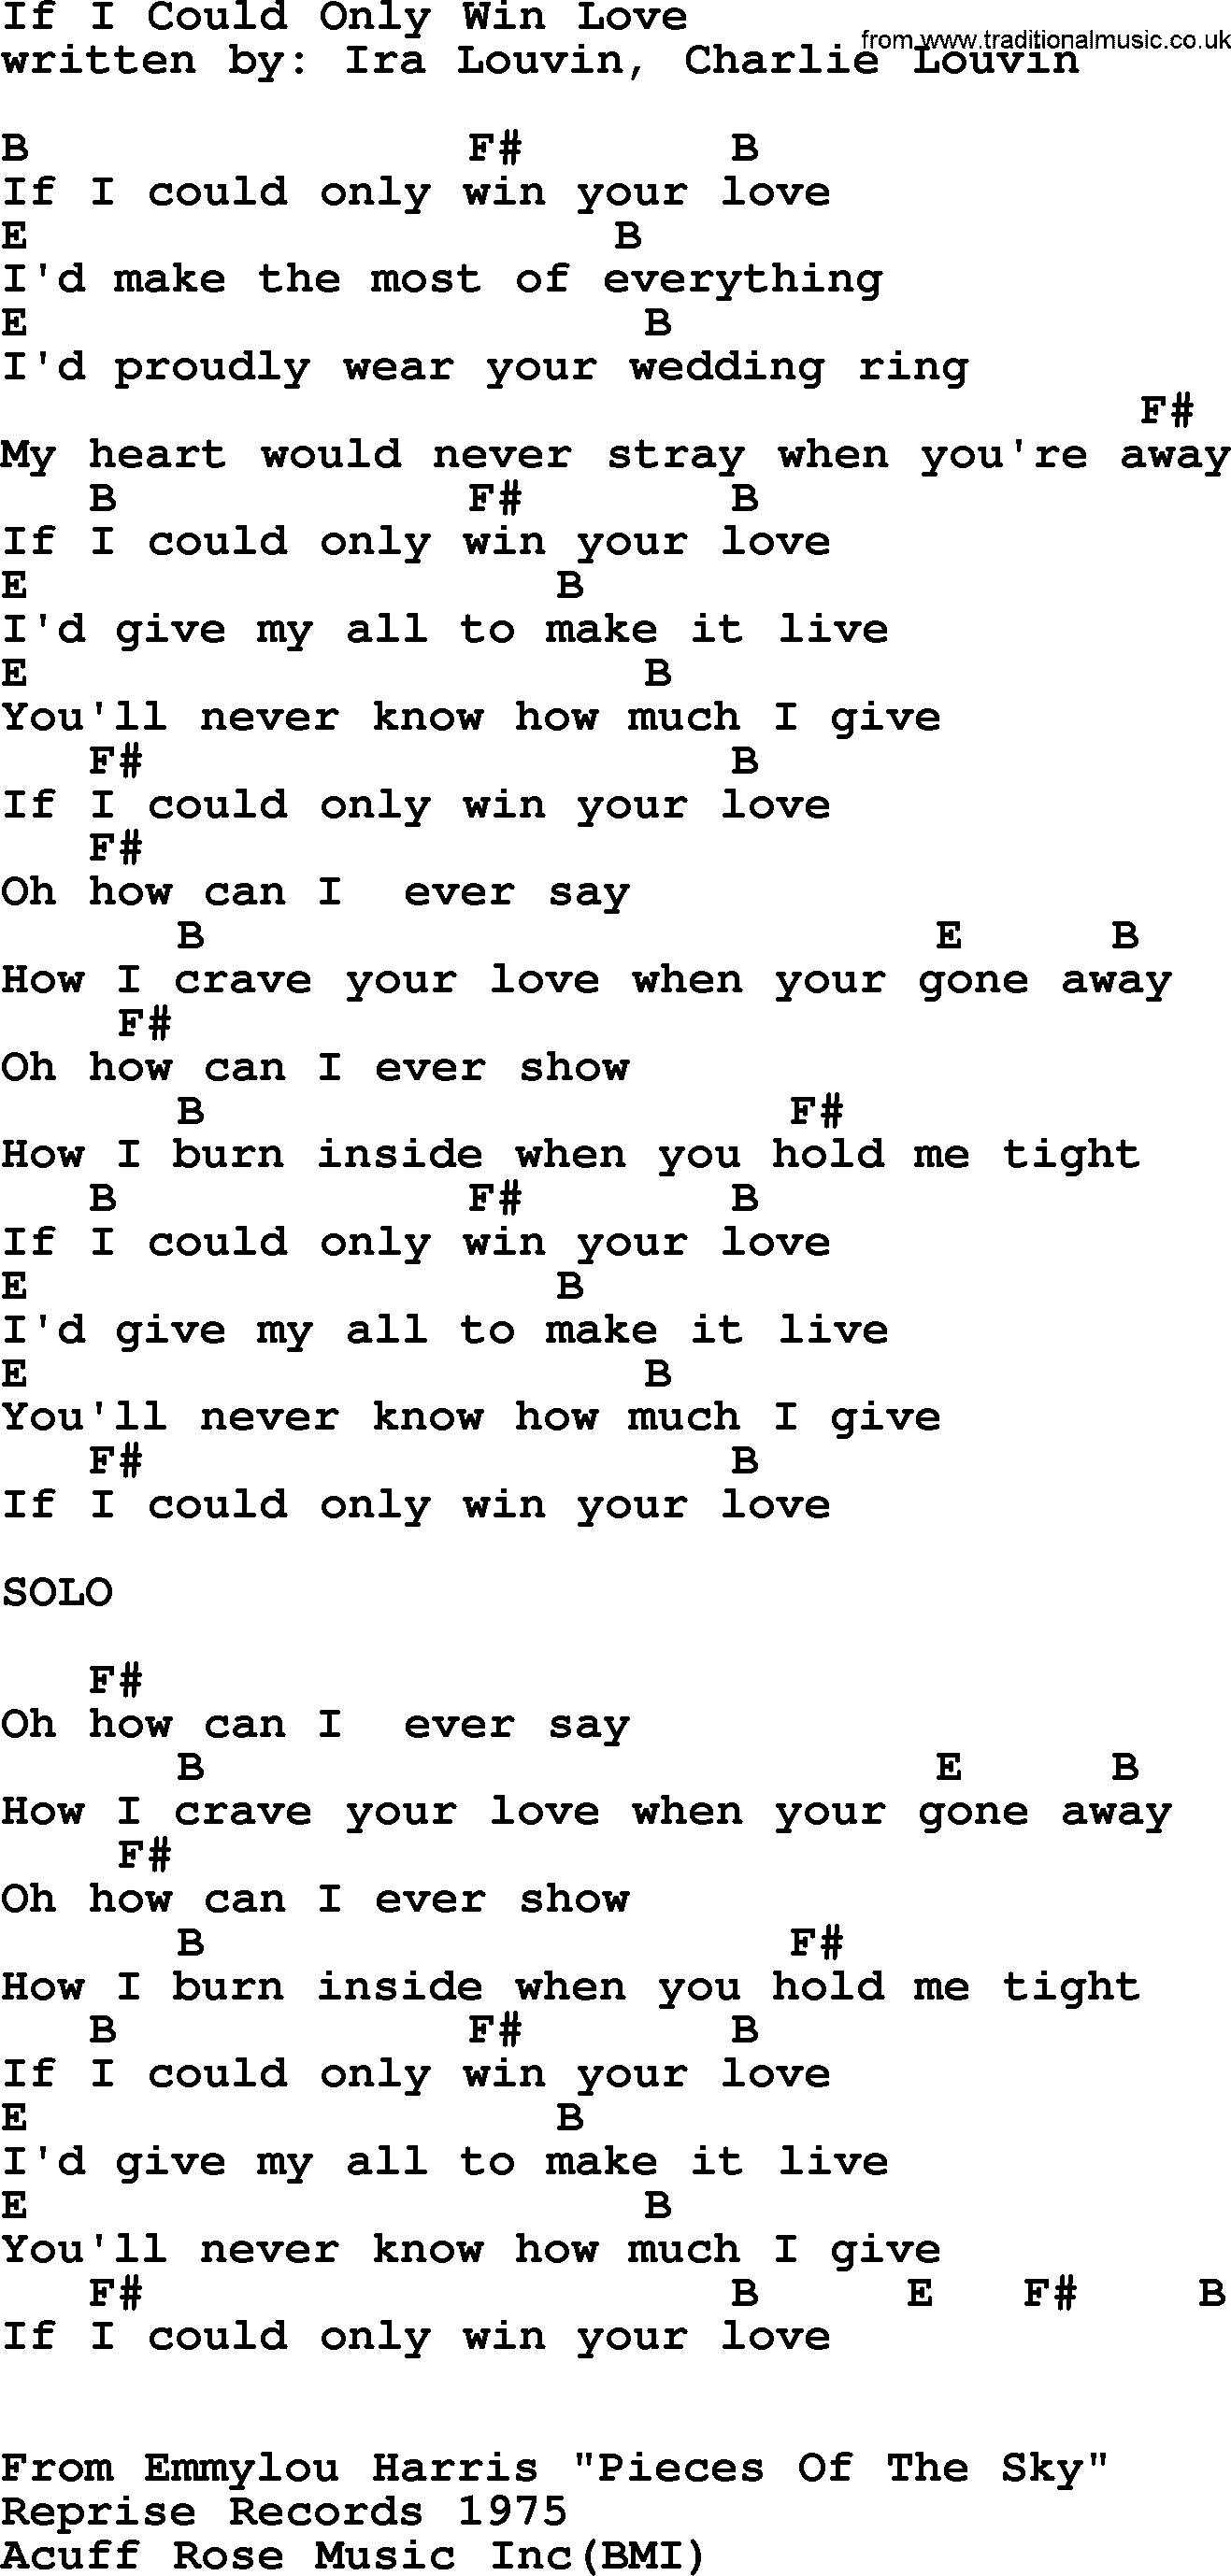 Emmylou Harris song: If I Could Only Win Love lyrics and chords